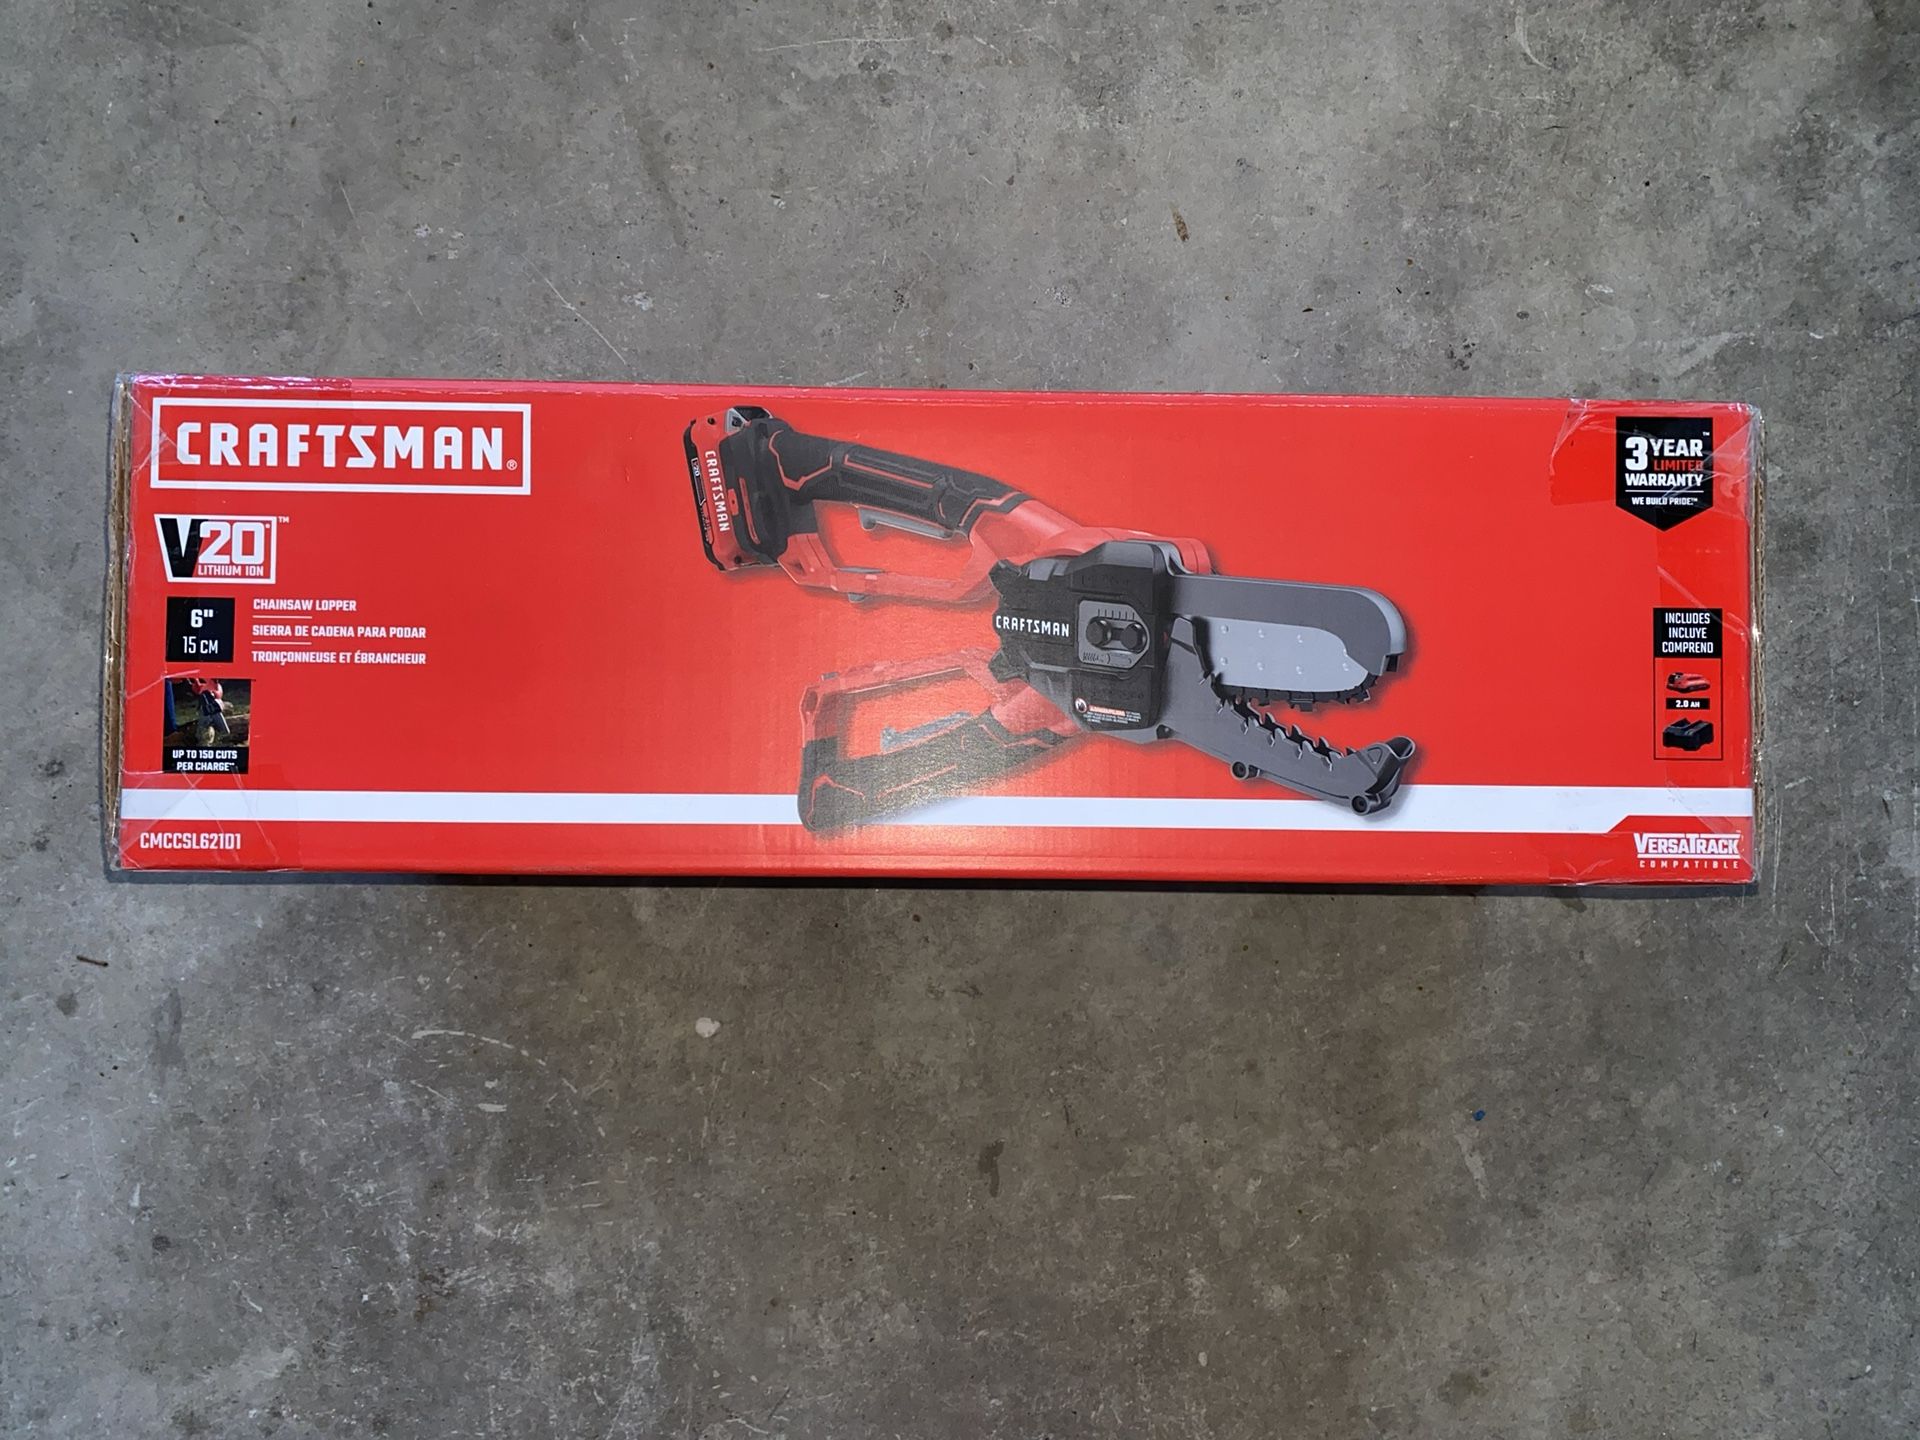 NEW FACTORY SEALED CRAFTSMAN V20 Cordless Lopper, 6 inch, Battery and Charger Included (CMCCSL621D1)